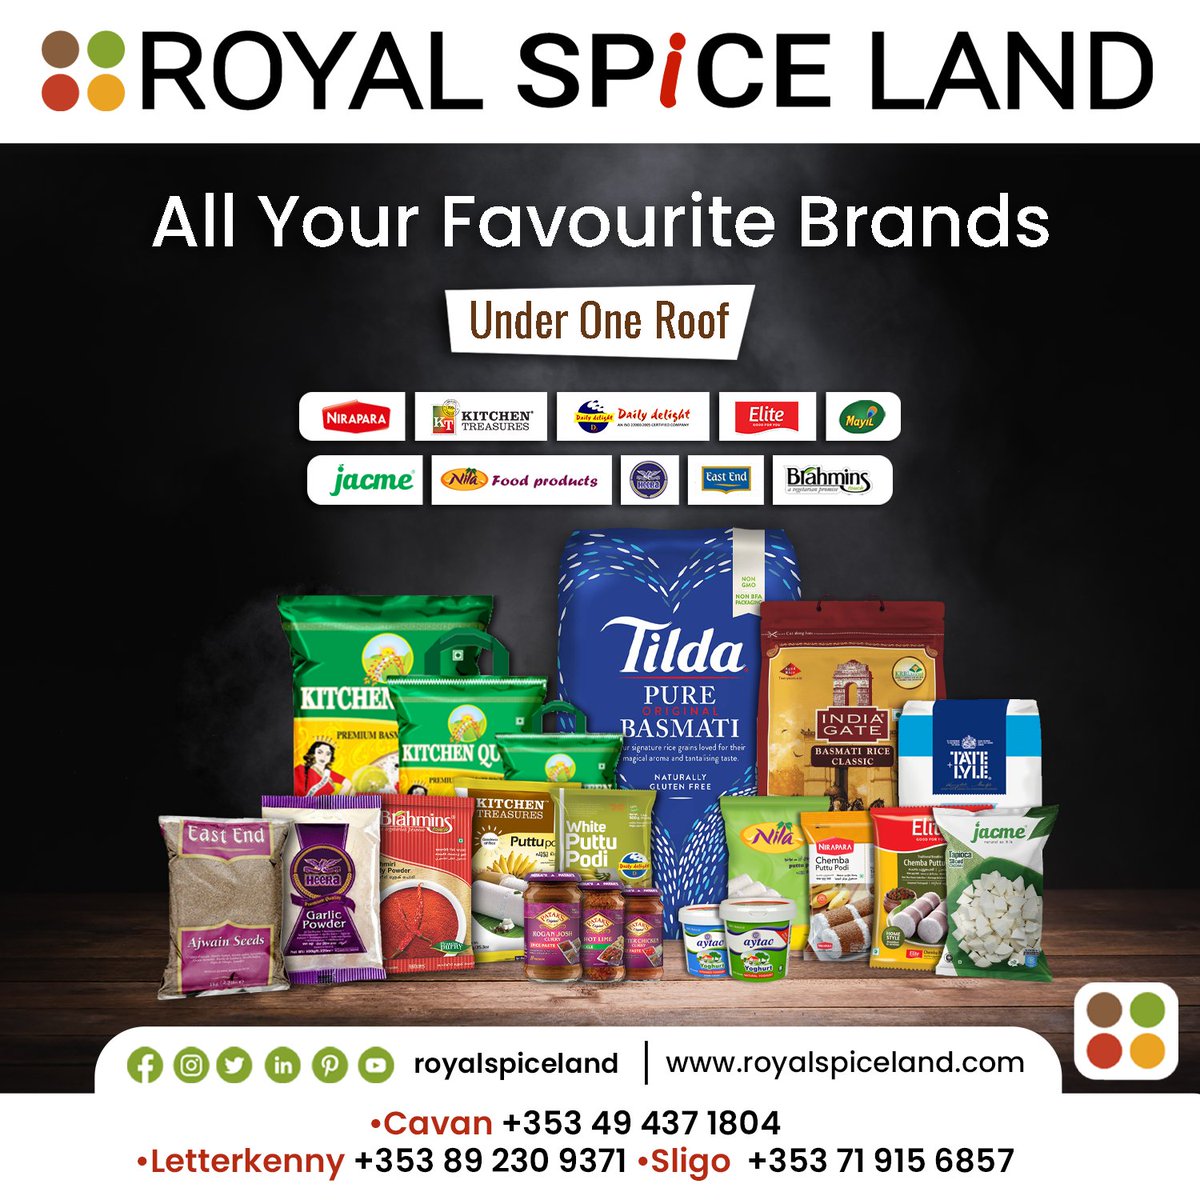 All your favourite Brands under One Roof!

Wide range of products available now  @royalspiceland  

#royalspiceland #groceryshop #foodproducts #nirapara #kitchentreasures #dailydelight #jacme #letterkenny #caven #sligo #ireland